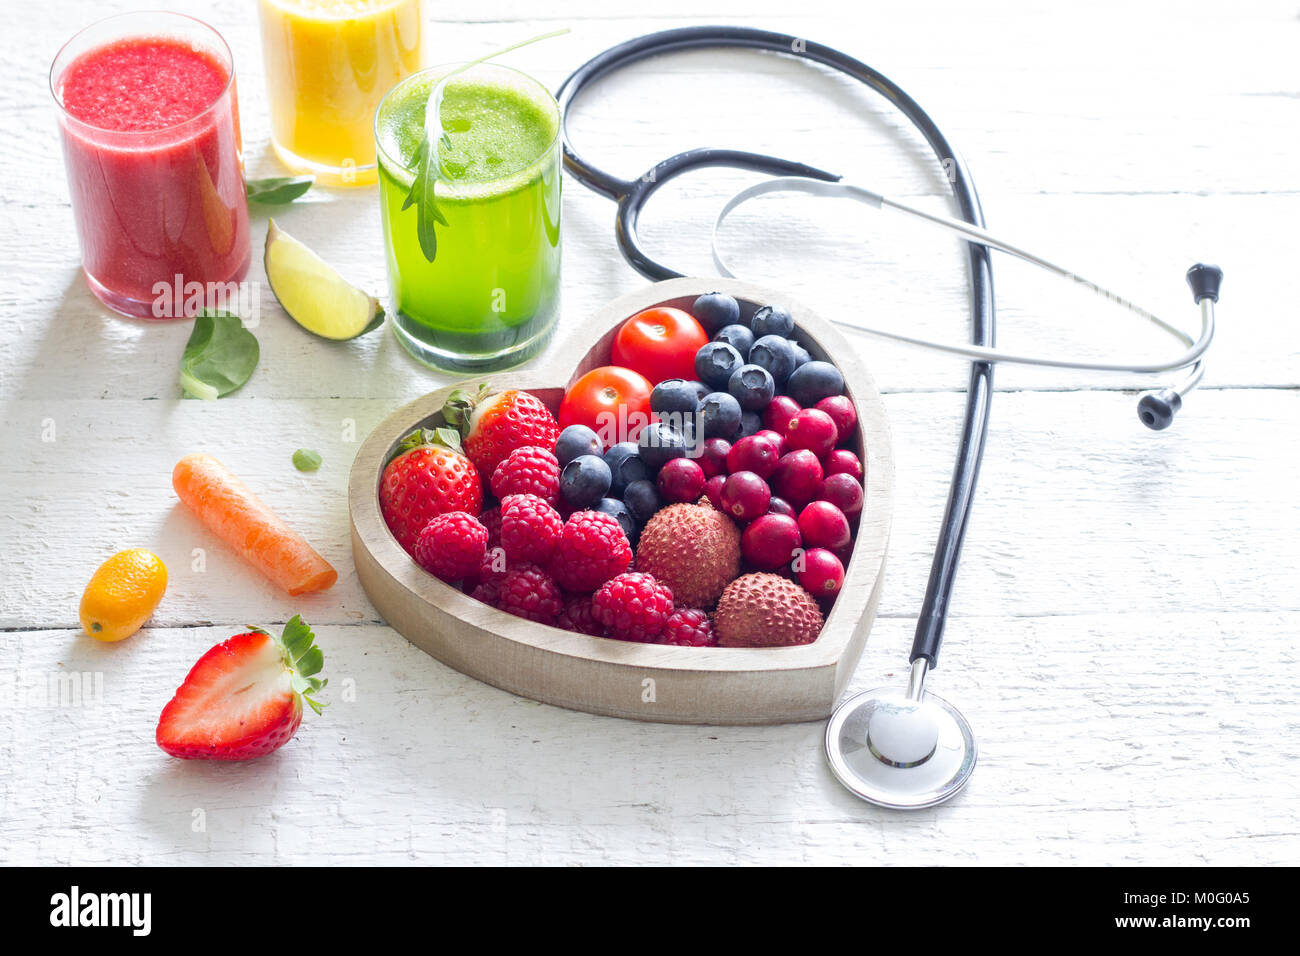 Fresh fruits vegetables and heart shape with stethoscope health diet concept Stock Photo